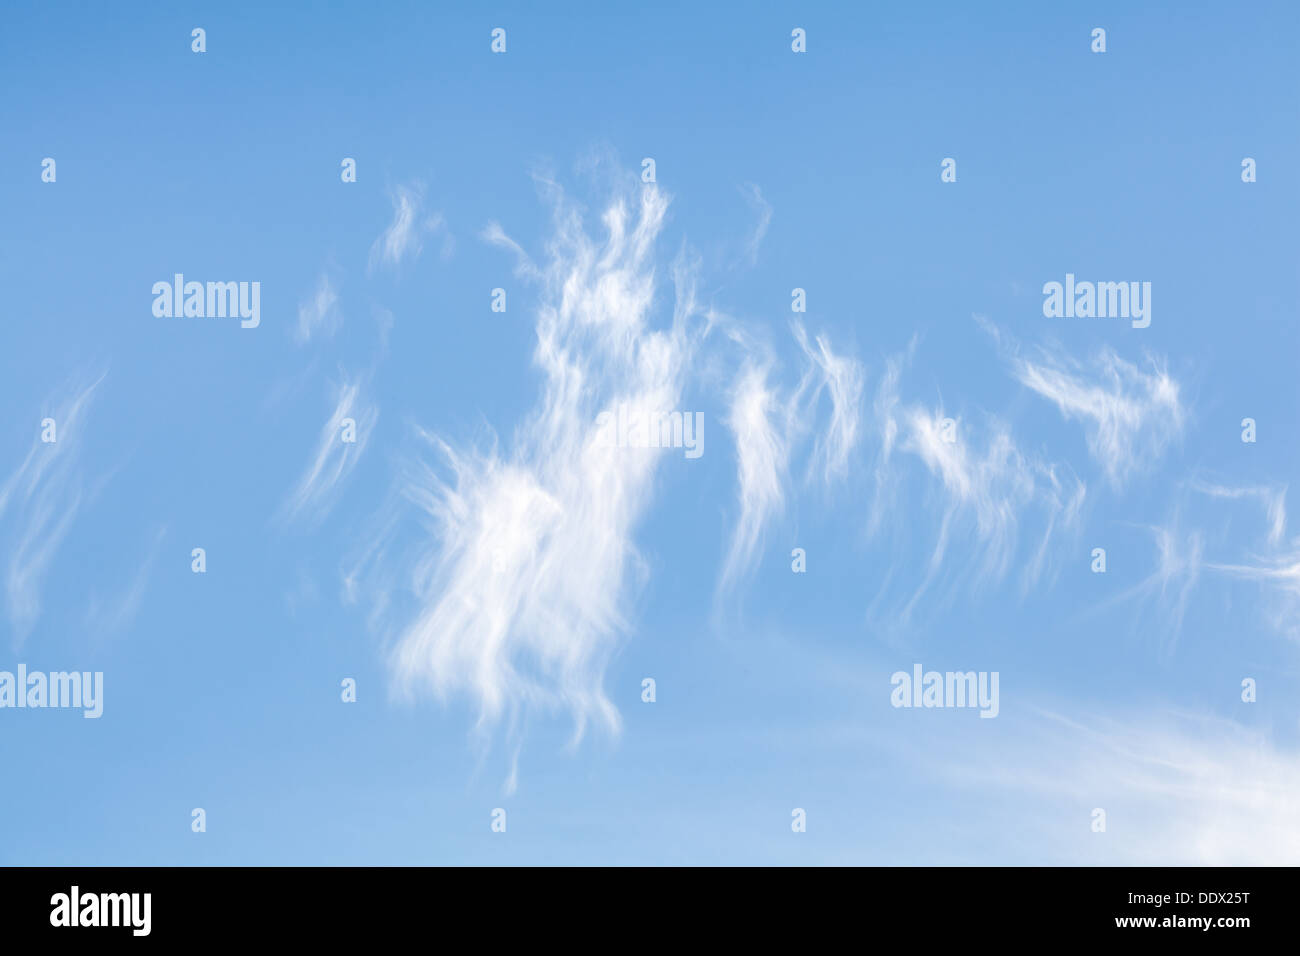 Cloud formations in the sky Stock Photo